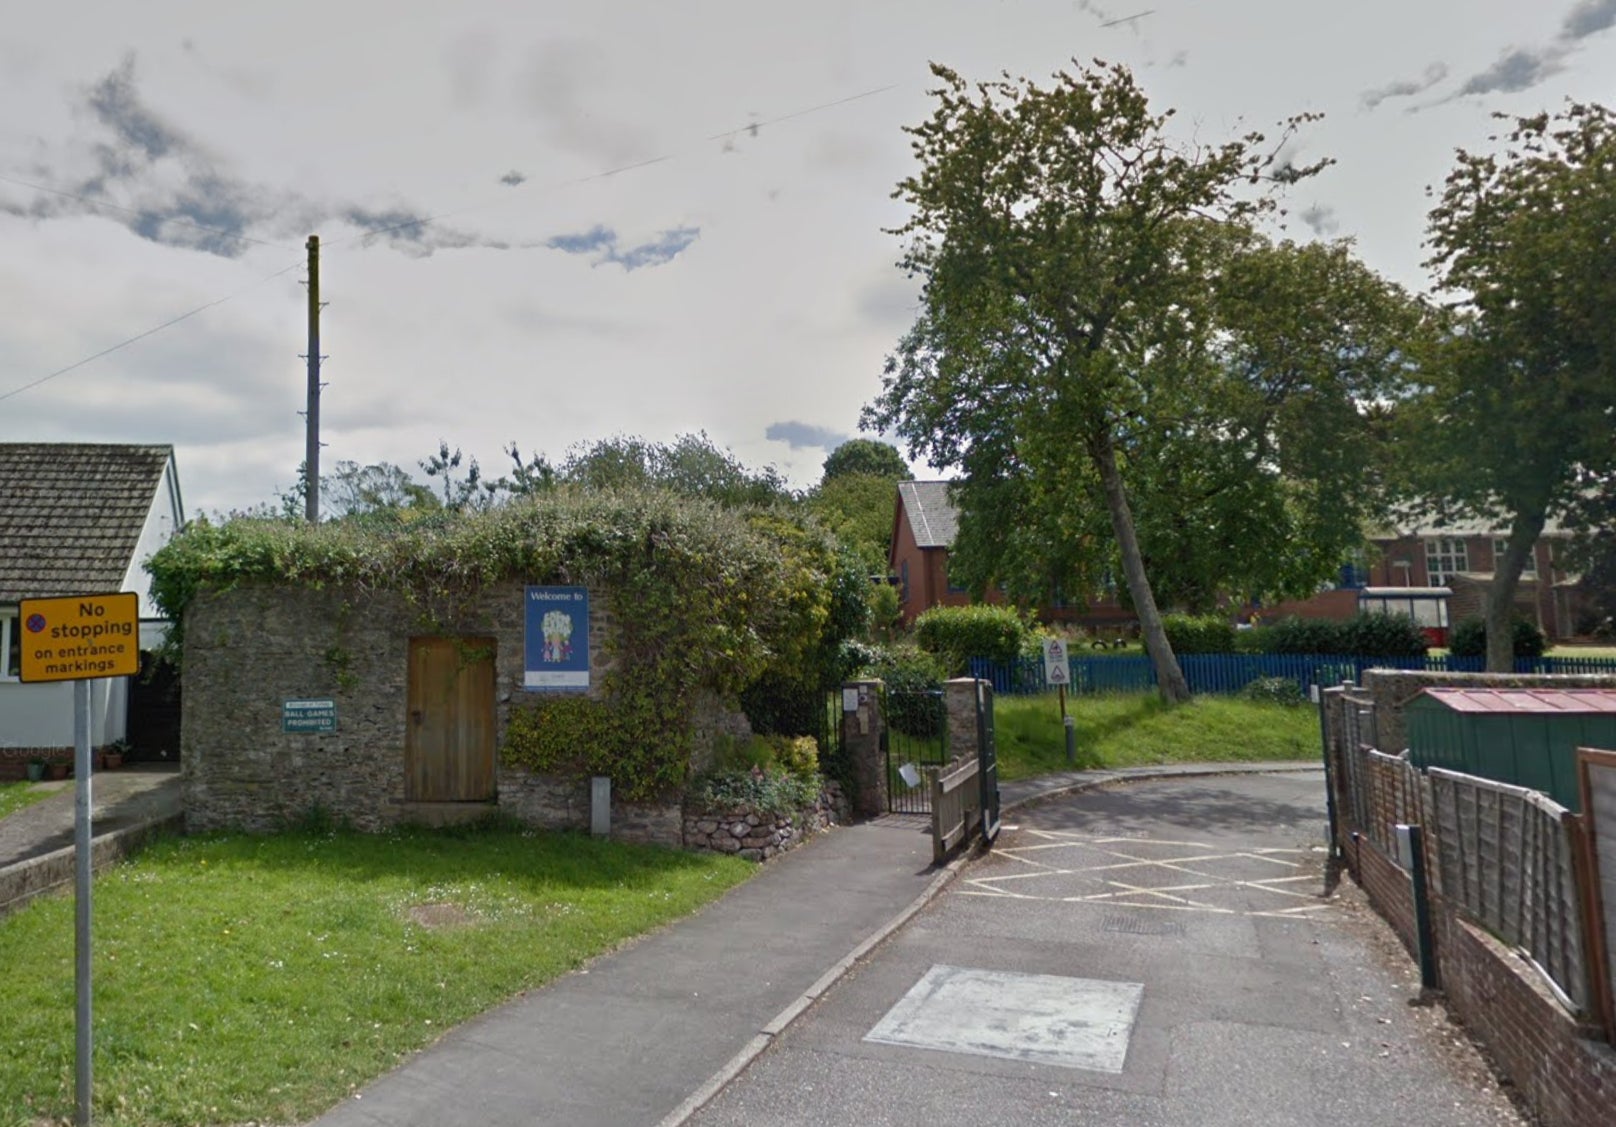 Eden Park Primary School in Brixham was forced to close over the outbreak